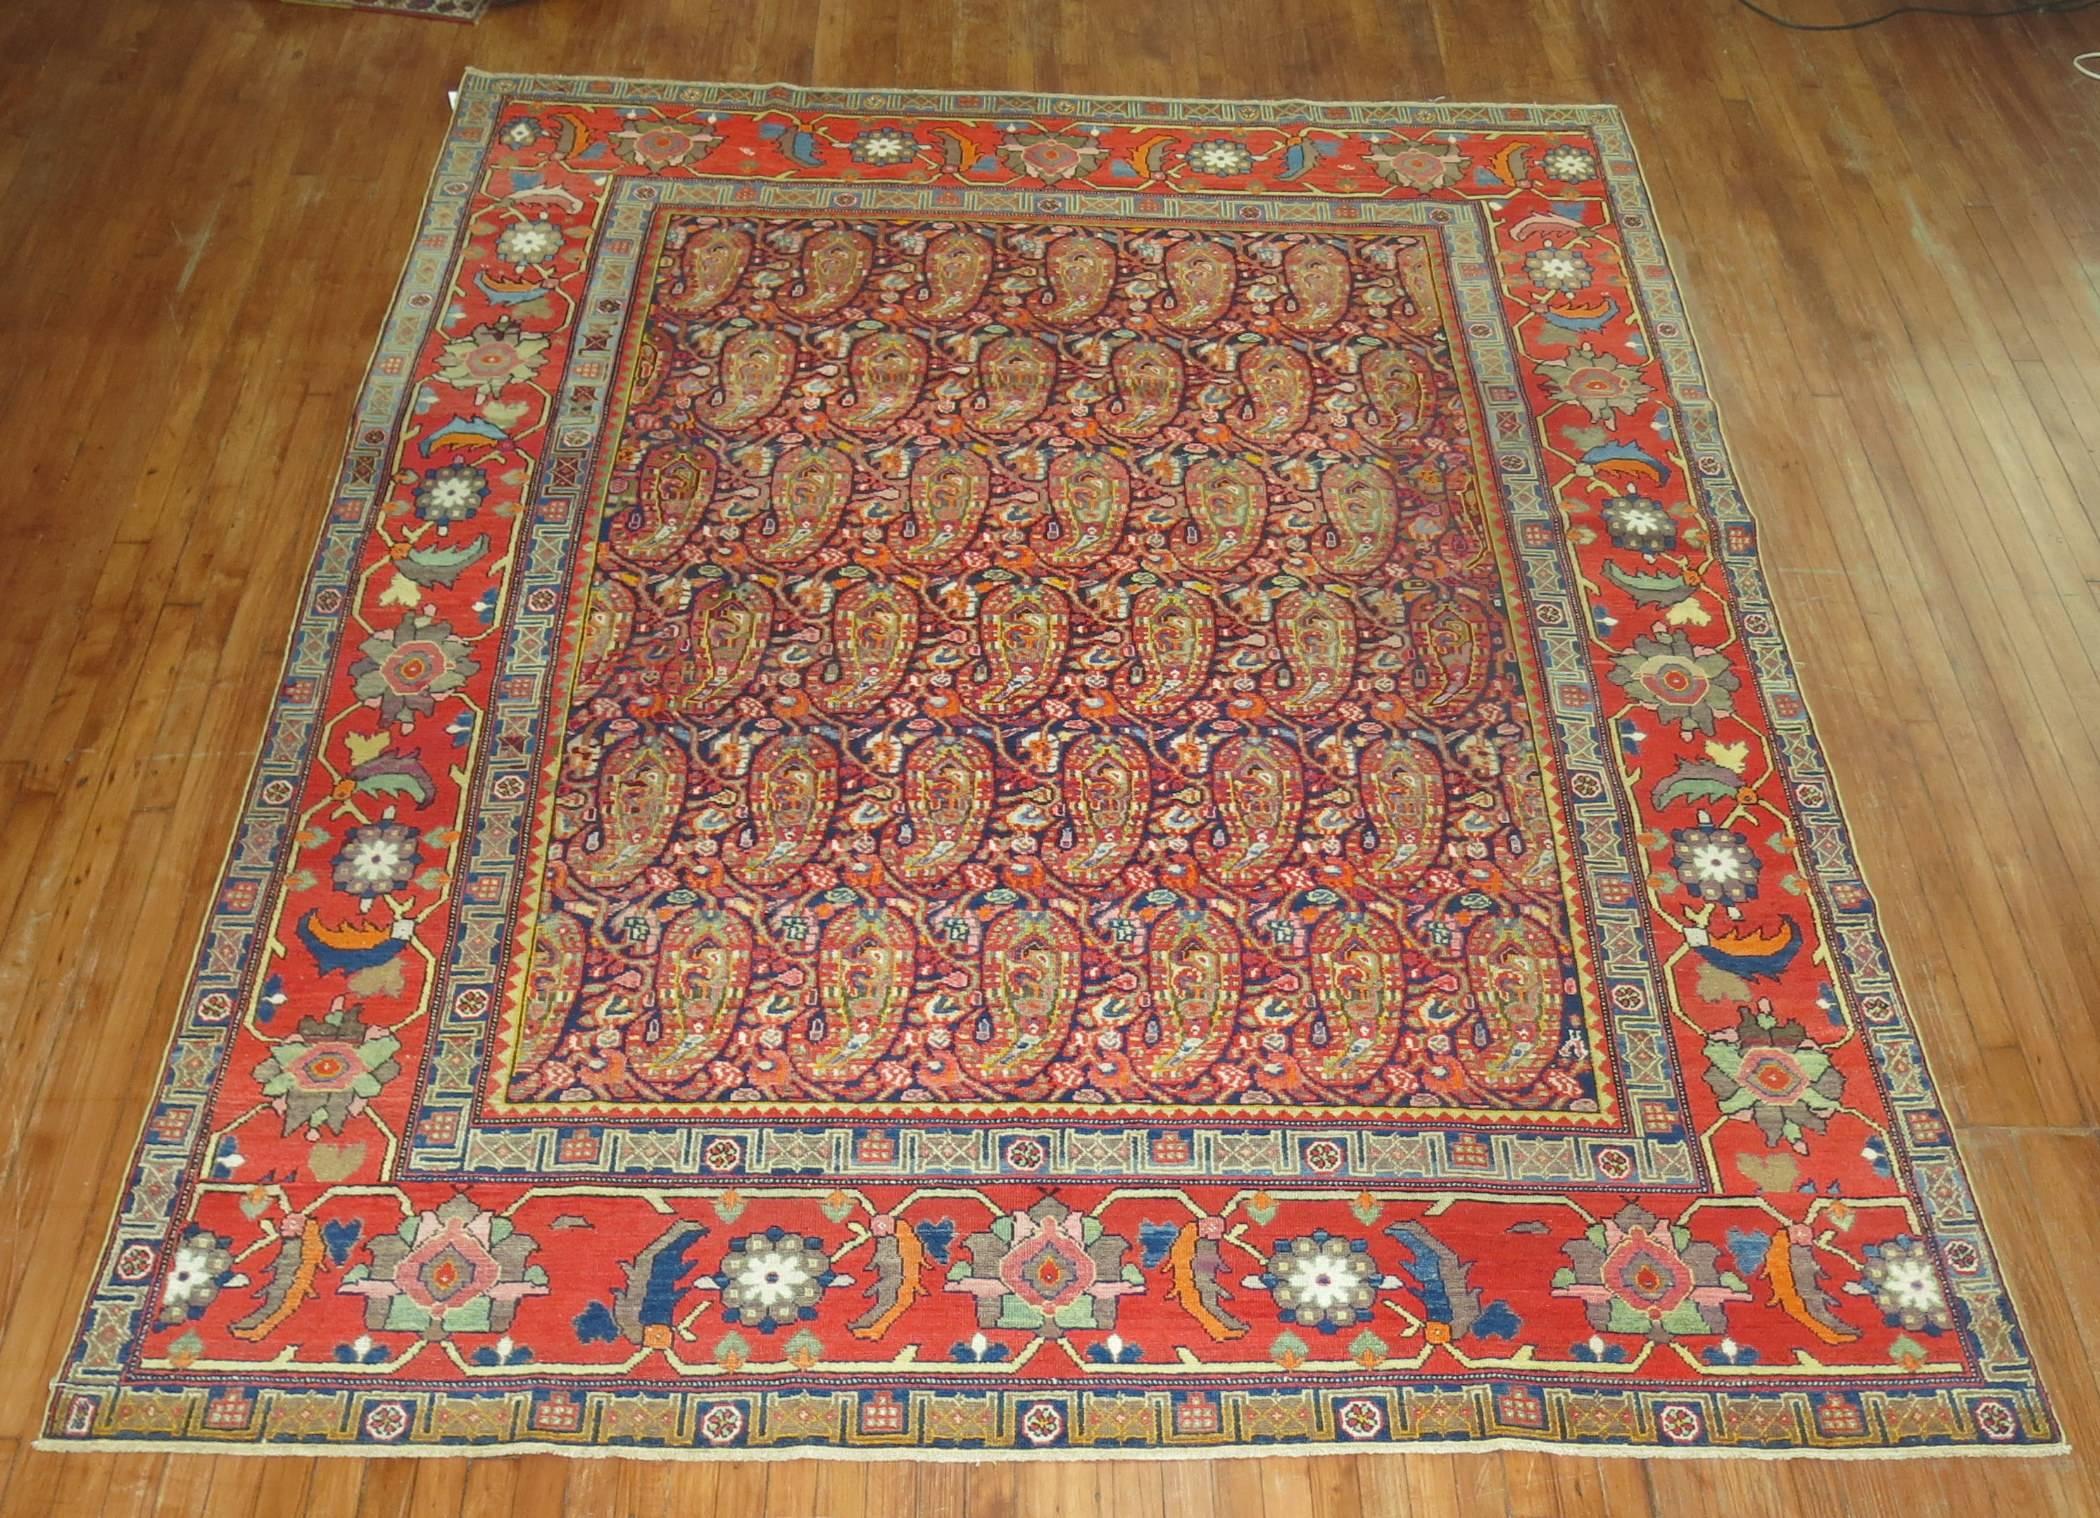 Fascinating Persian Malayer rug featuring a large paisley design on a blue ground.

7'10'' x 9'10''